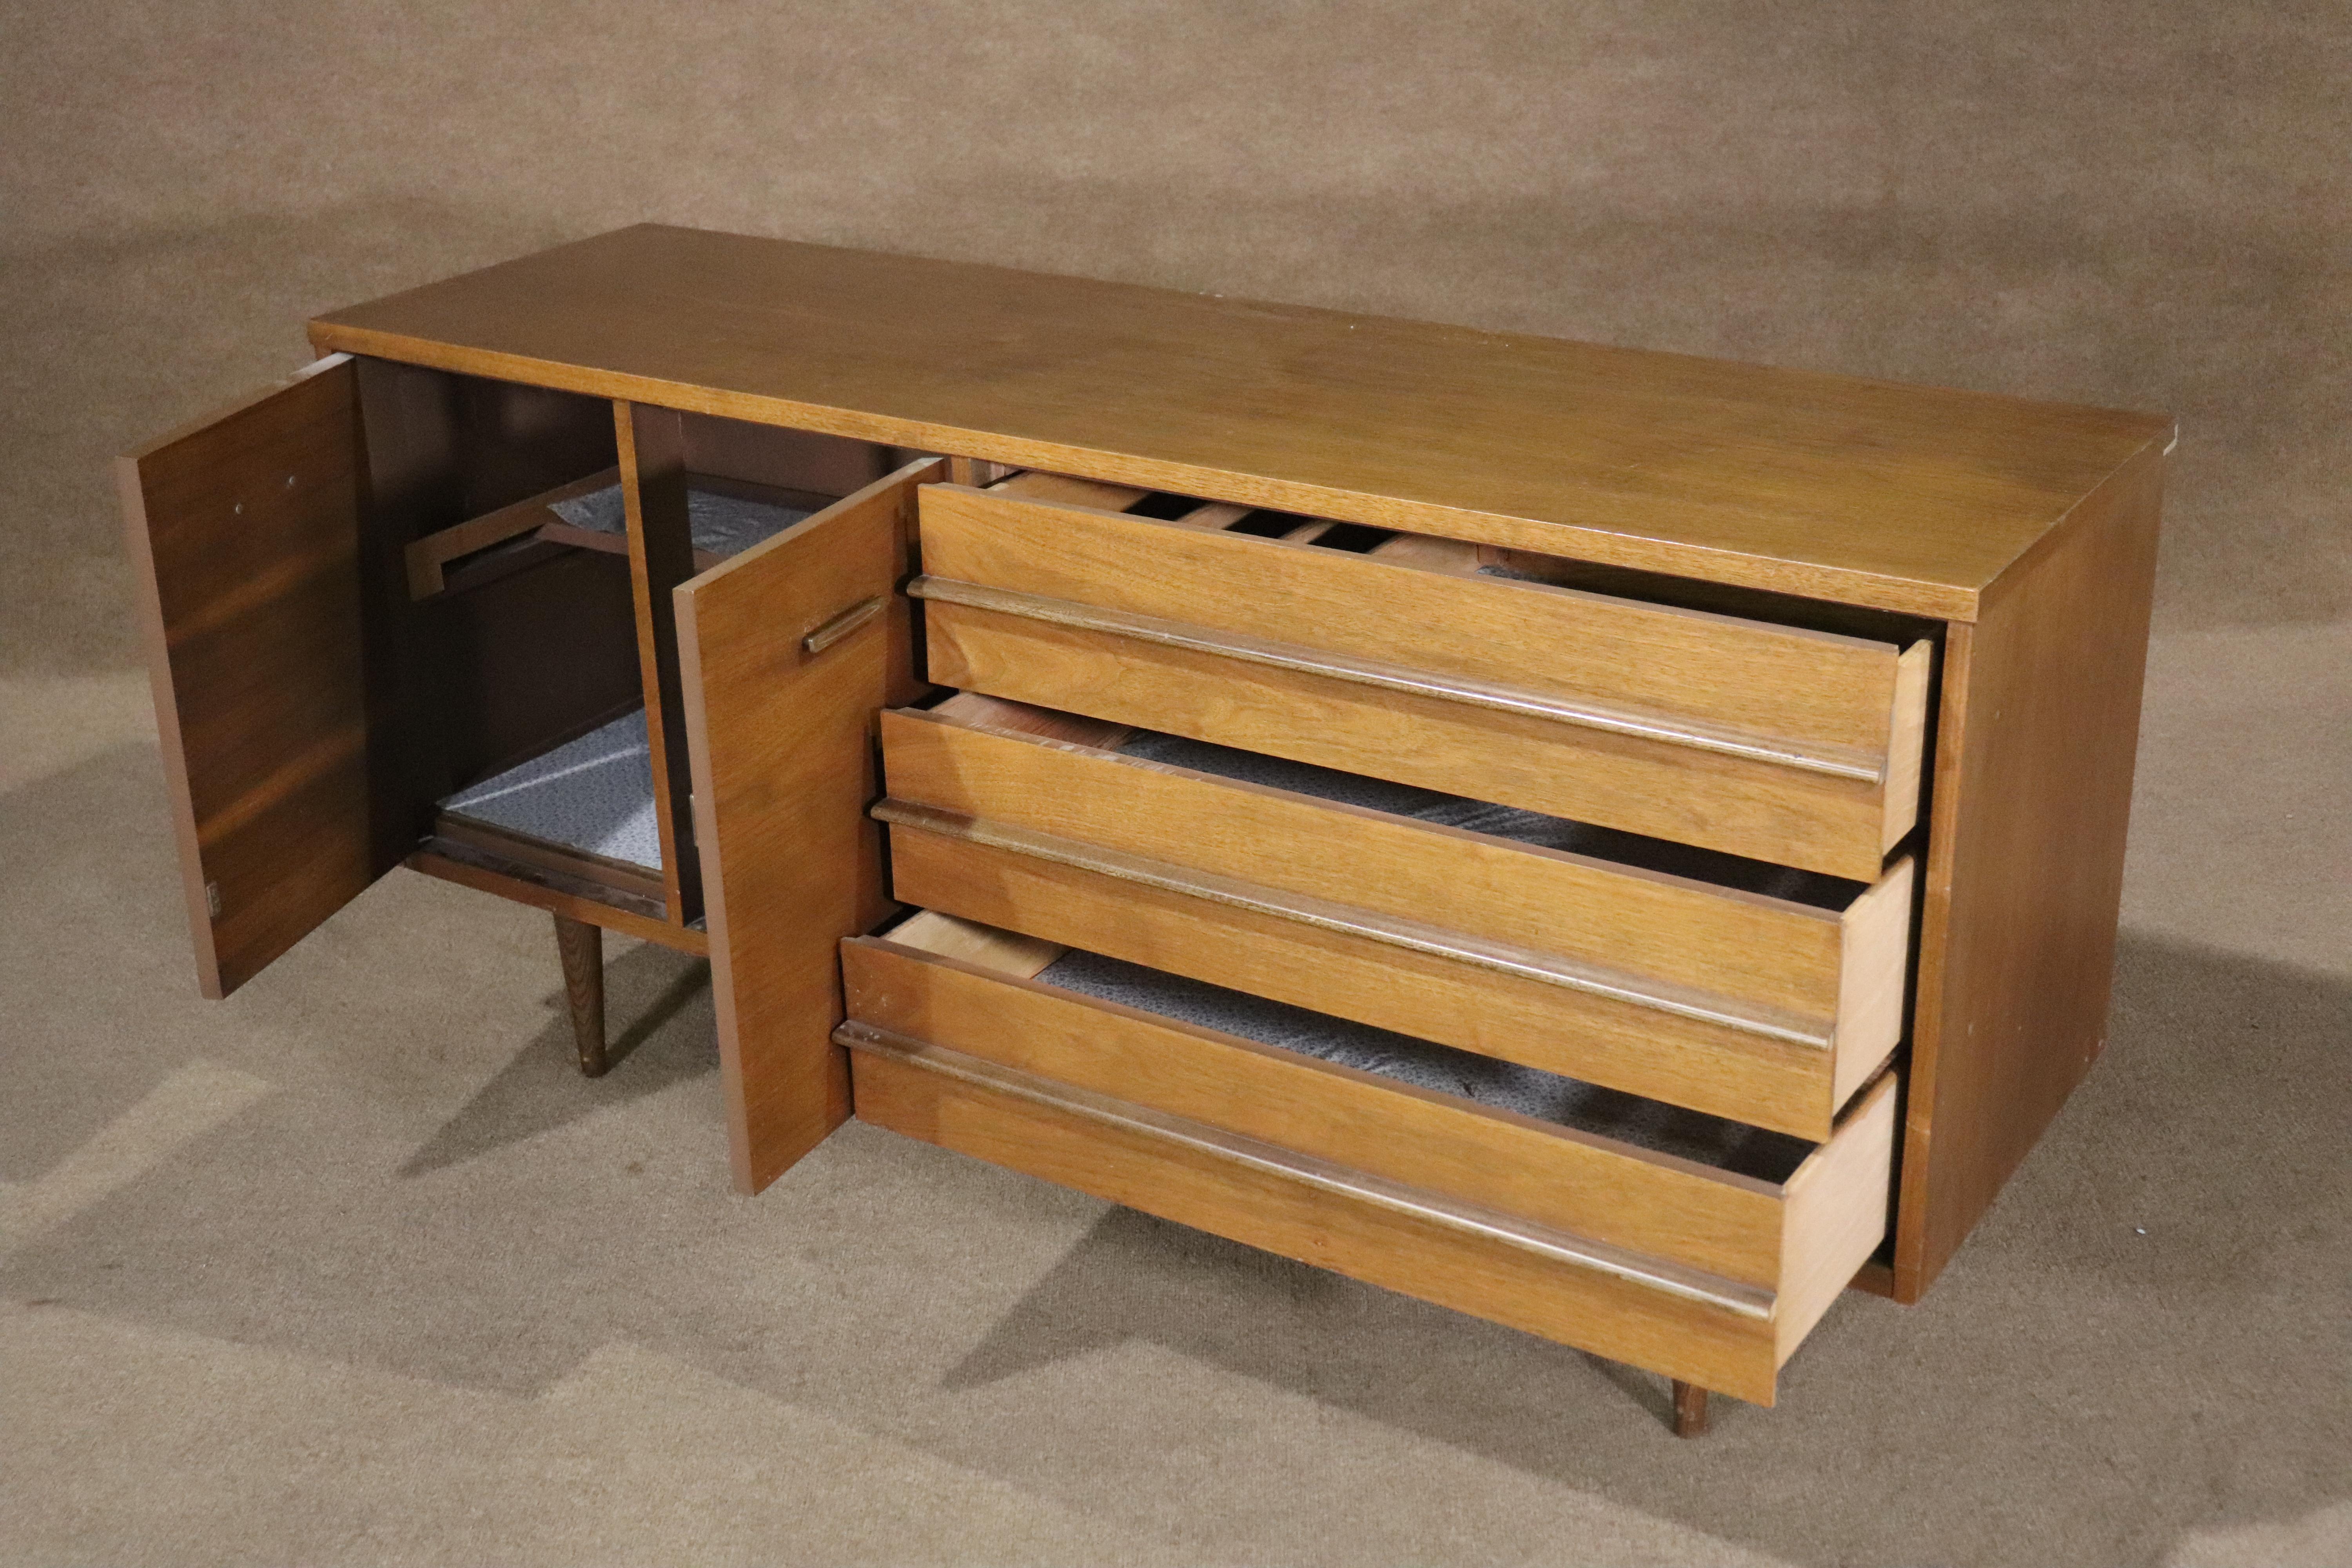 Low dresser with cabinet storage in walnut grain. Designed by Leo Jiranek for Bassett Furniture in the 1960s. Mid-century style that fits in your modern home.
Please confirm location NY or NJ